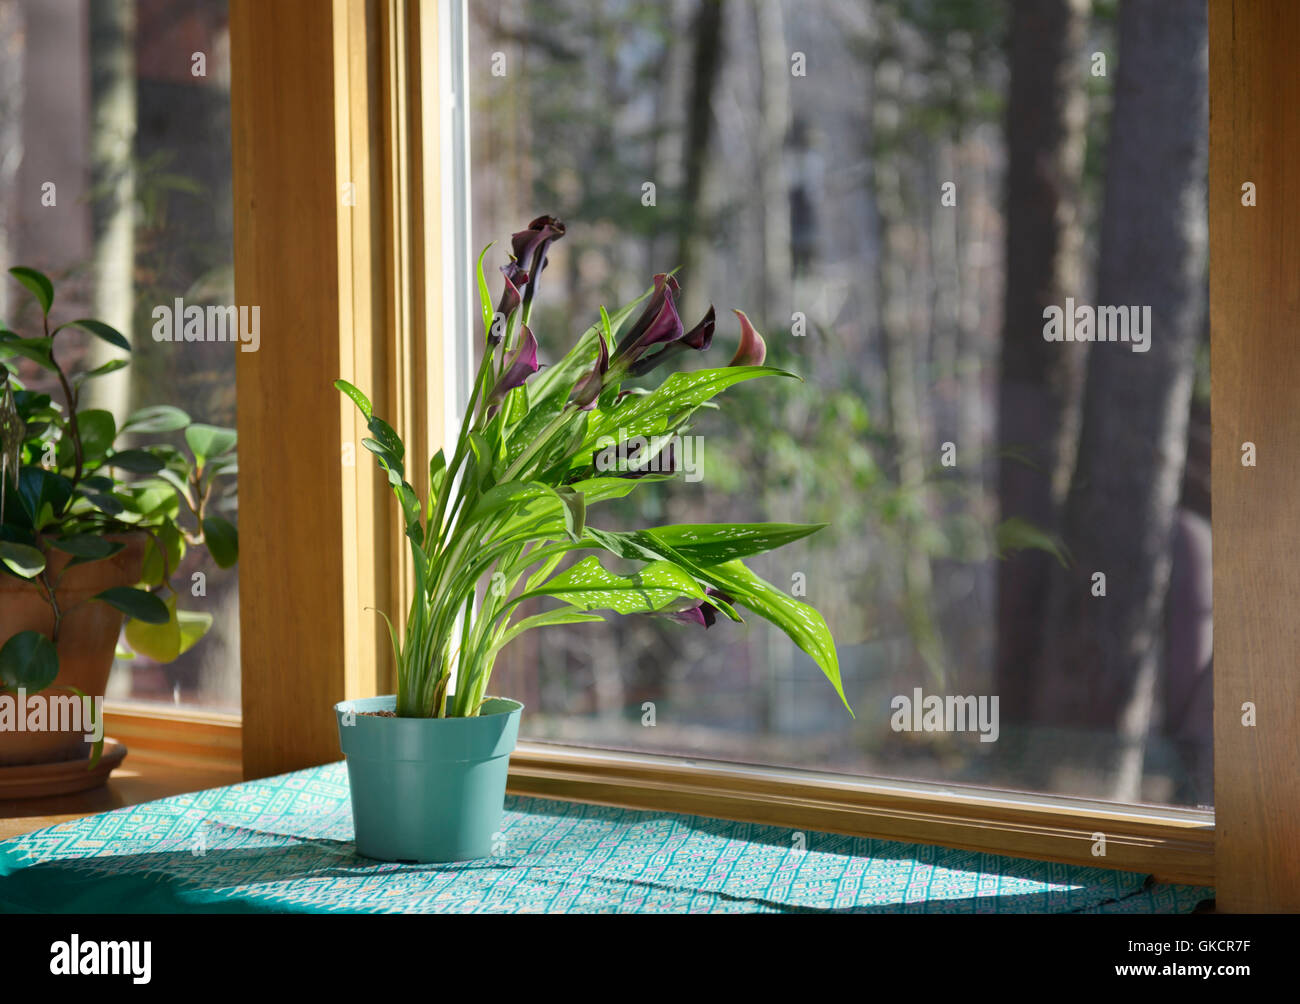 Phototropism before and after sequence with image GKCR82 Calla Lily bending towards sunlight Stock Photo